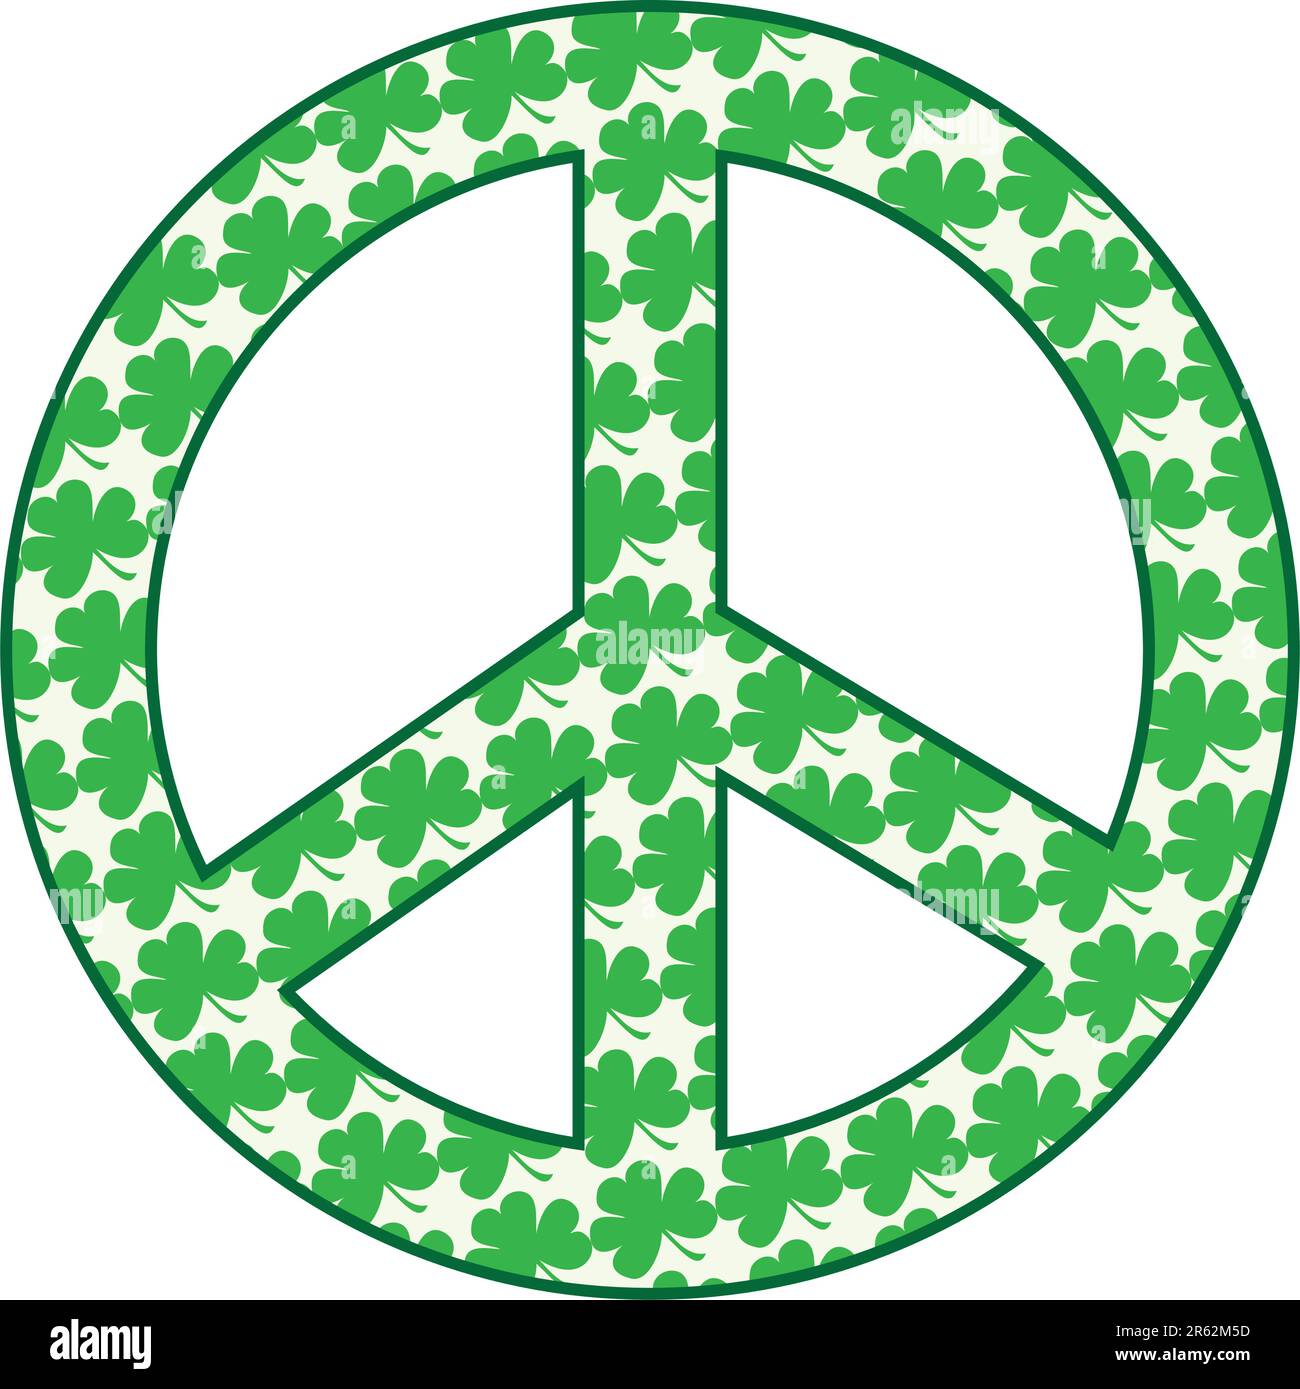 A peace sign filled with green shamrocks Stock Vector